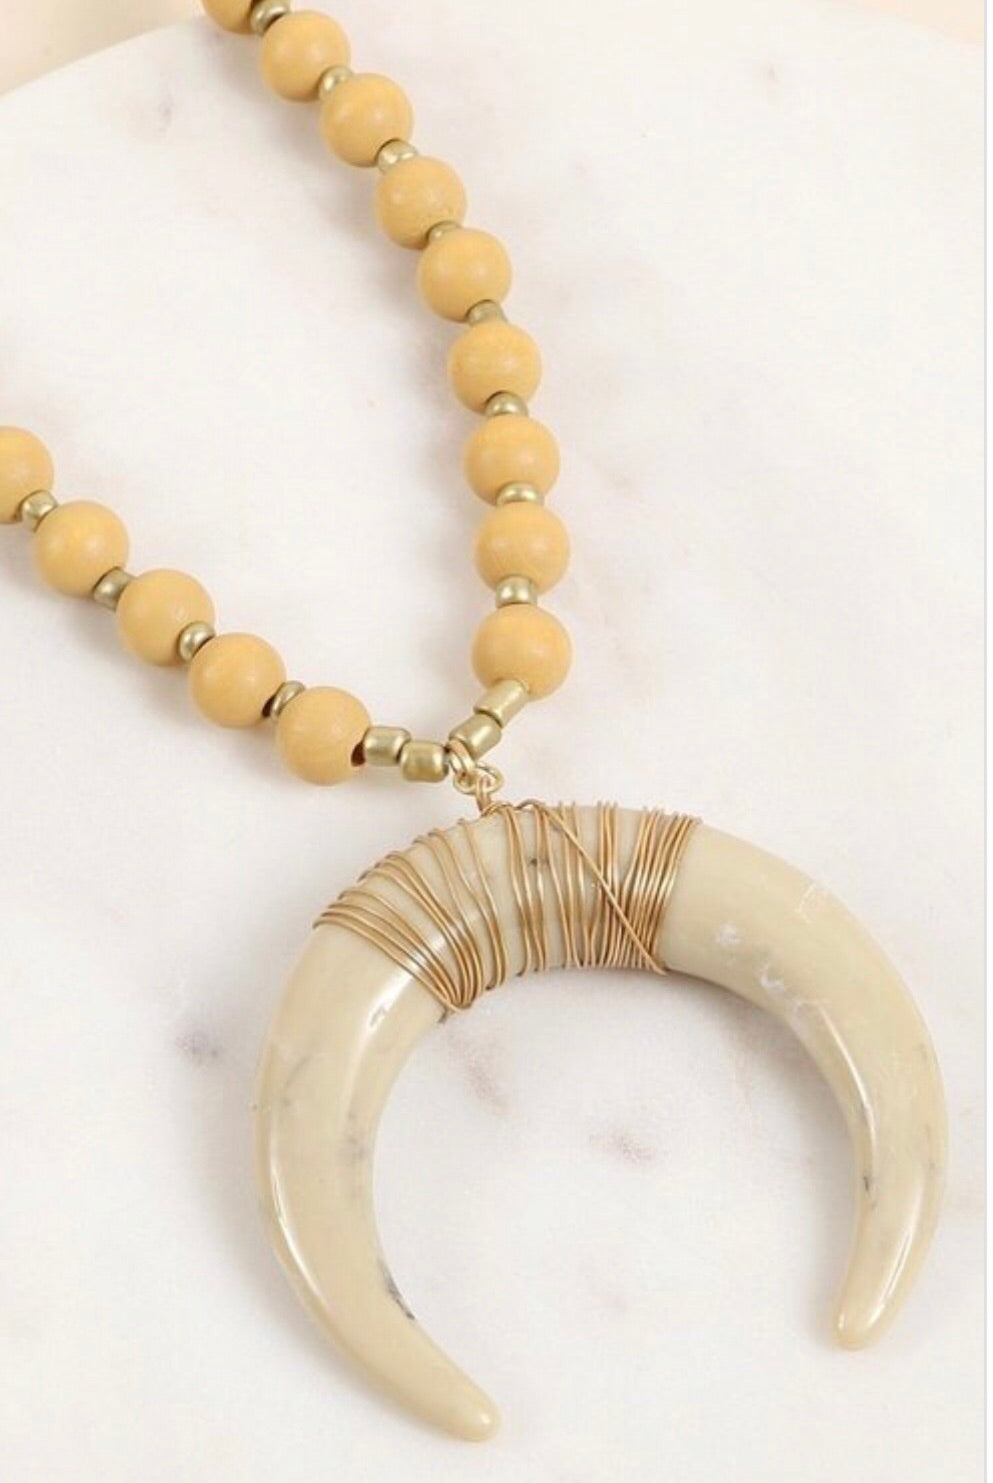 Long Bead and Horn Wooden Necklace - Corinne an Affordable Women's Clothing Boutique in the US USA